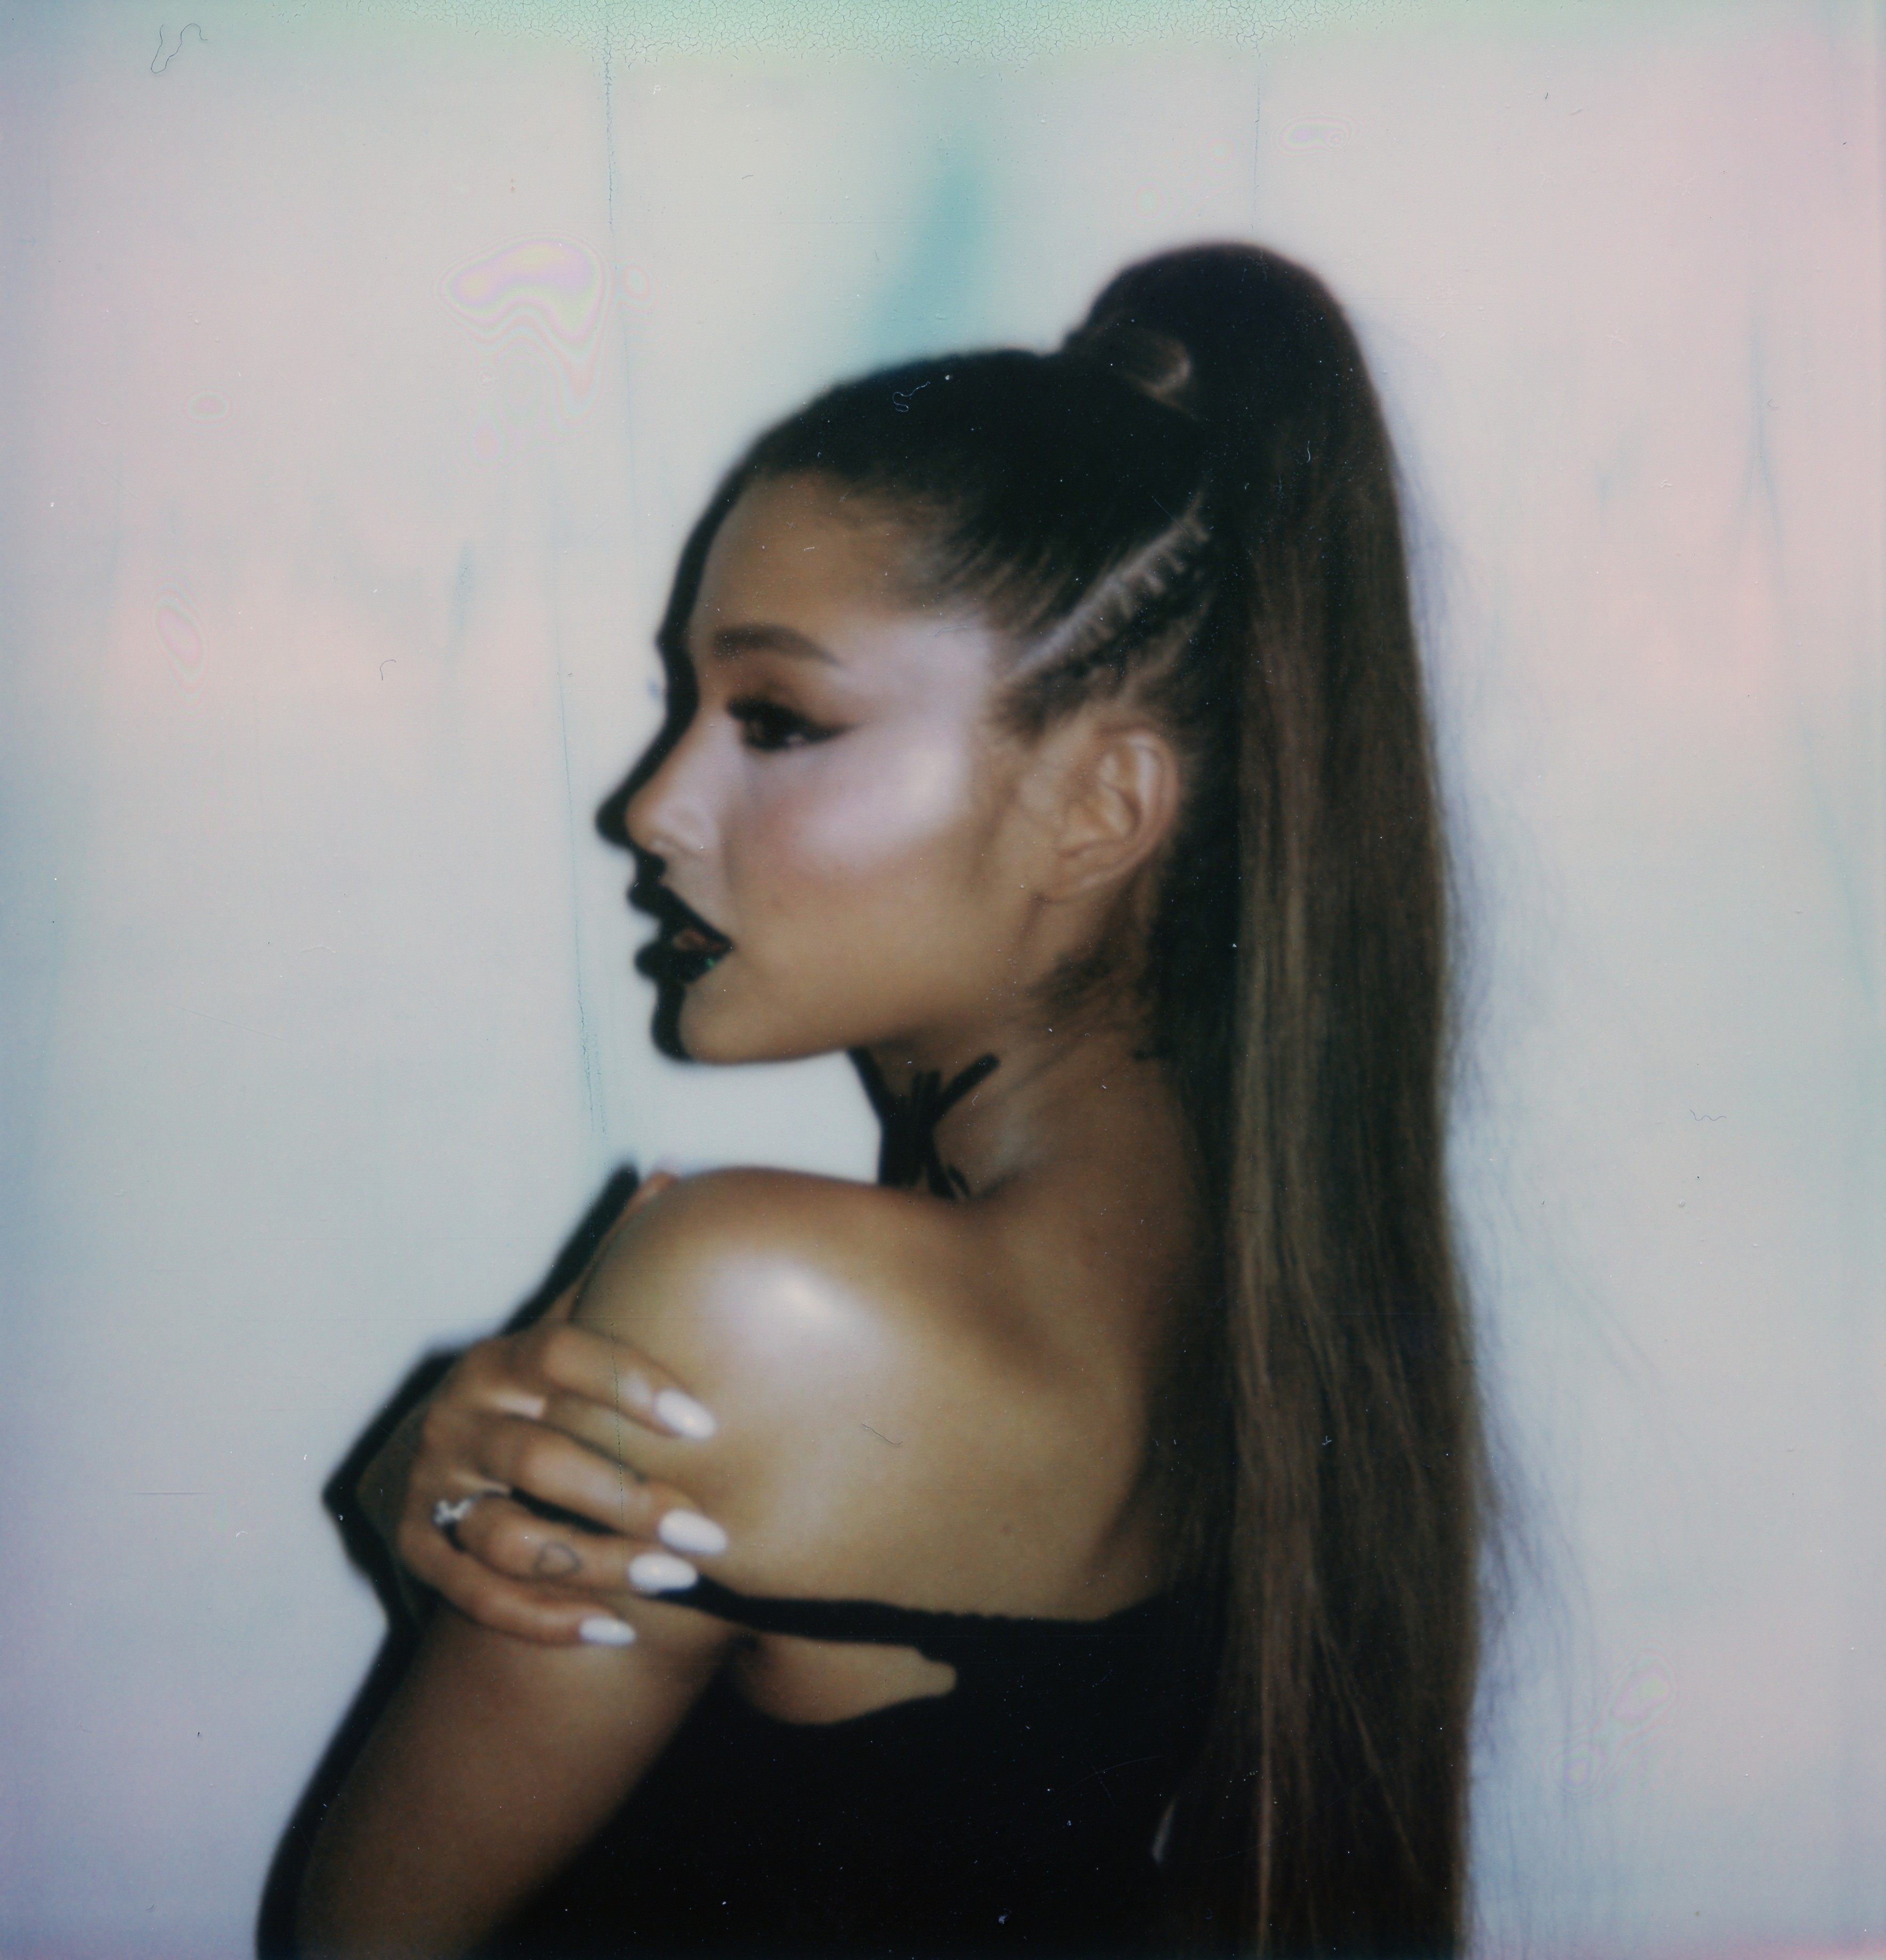 Ariana Grande's new album 'thank u, next' is like therapy